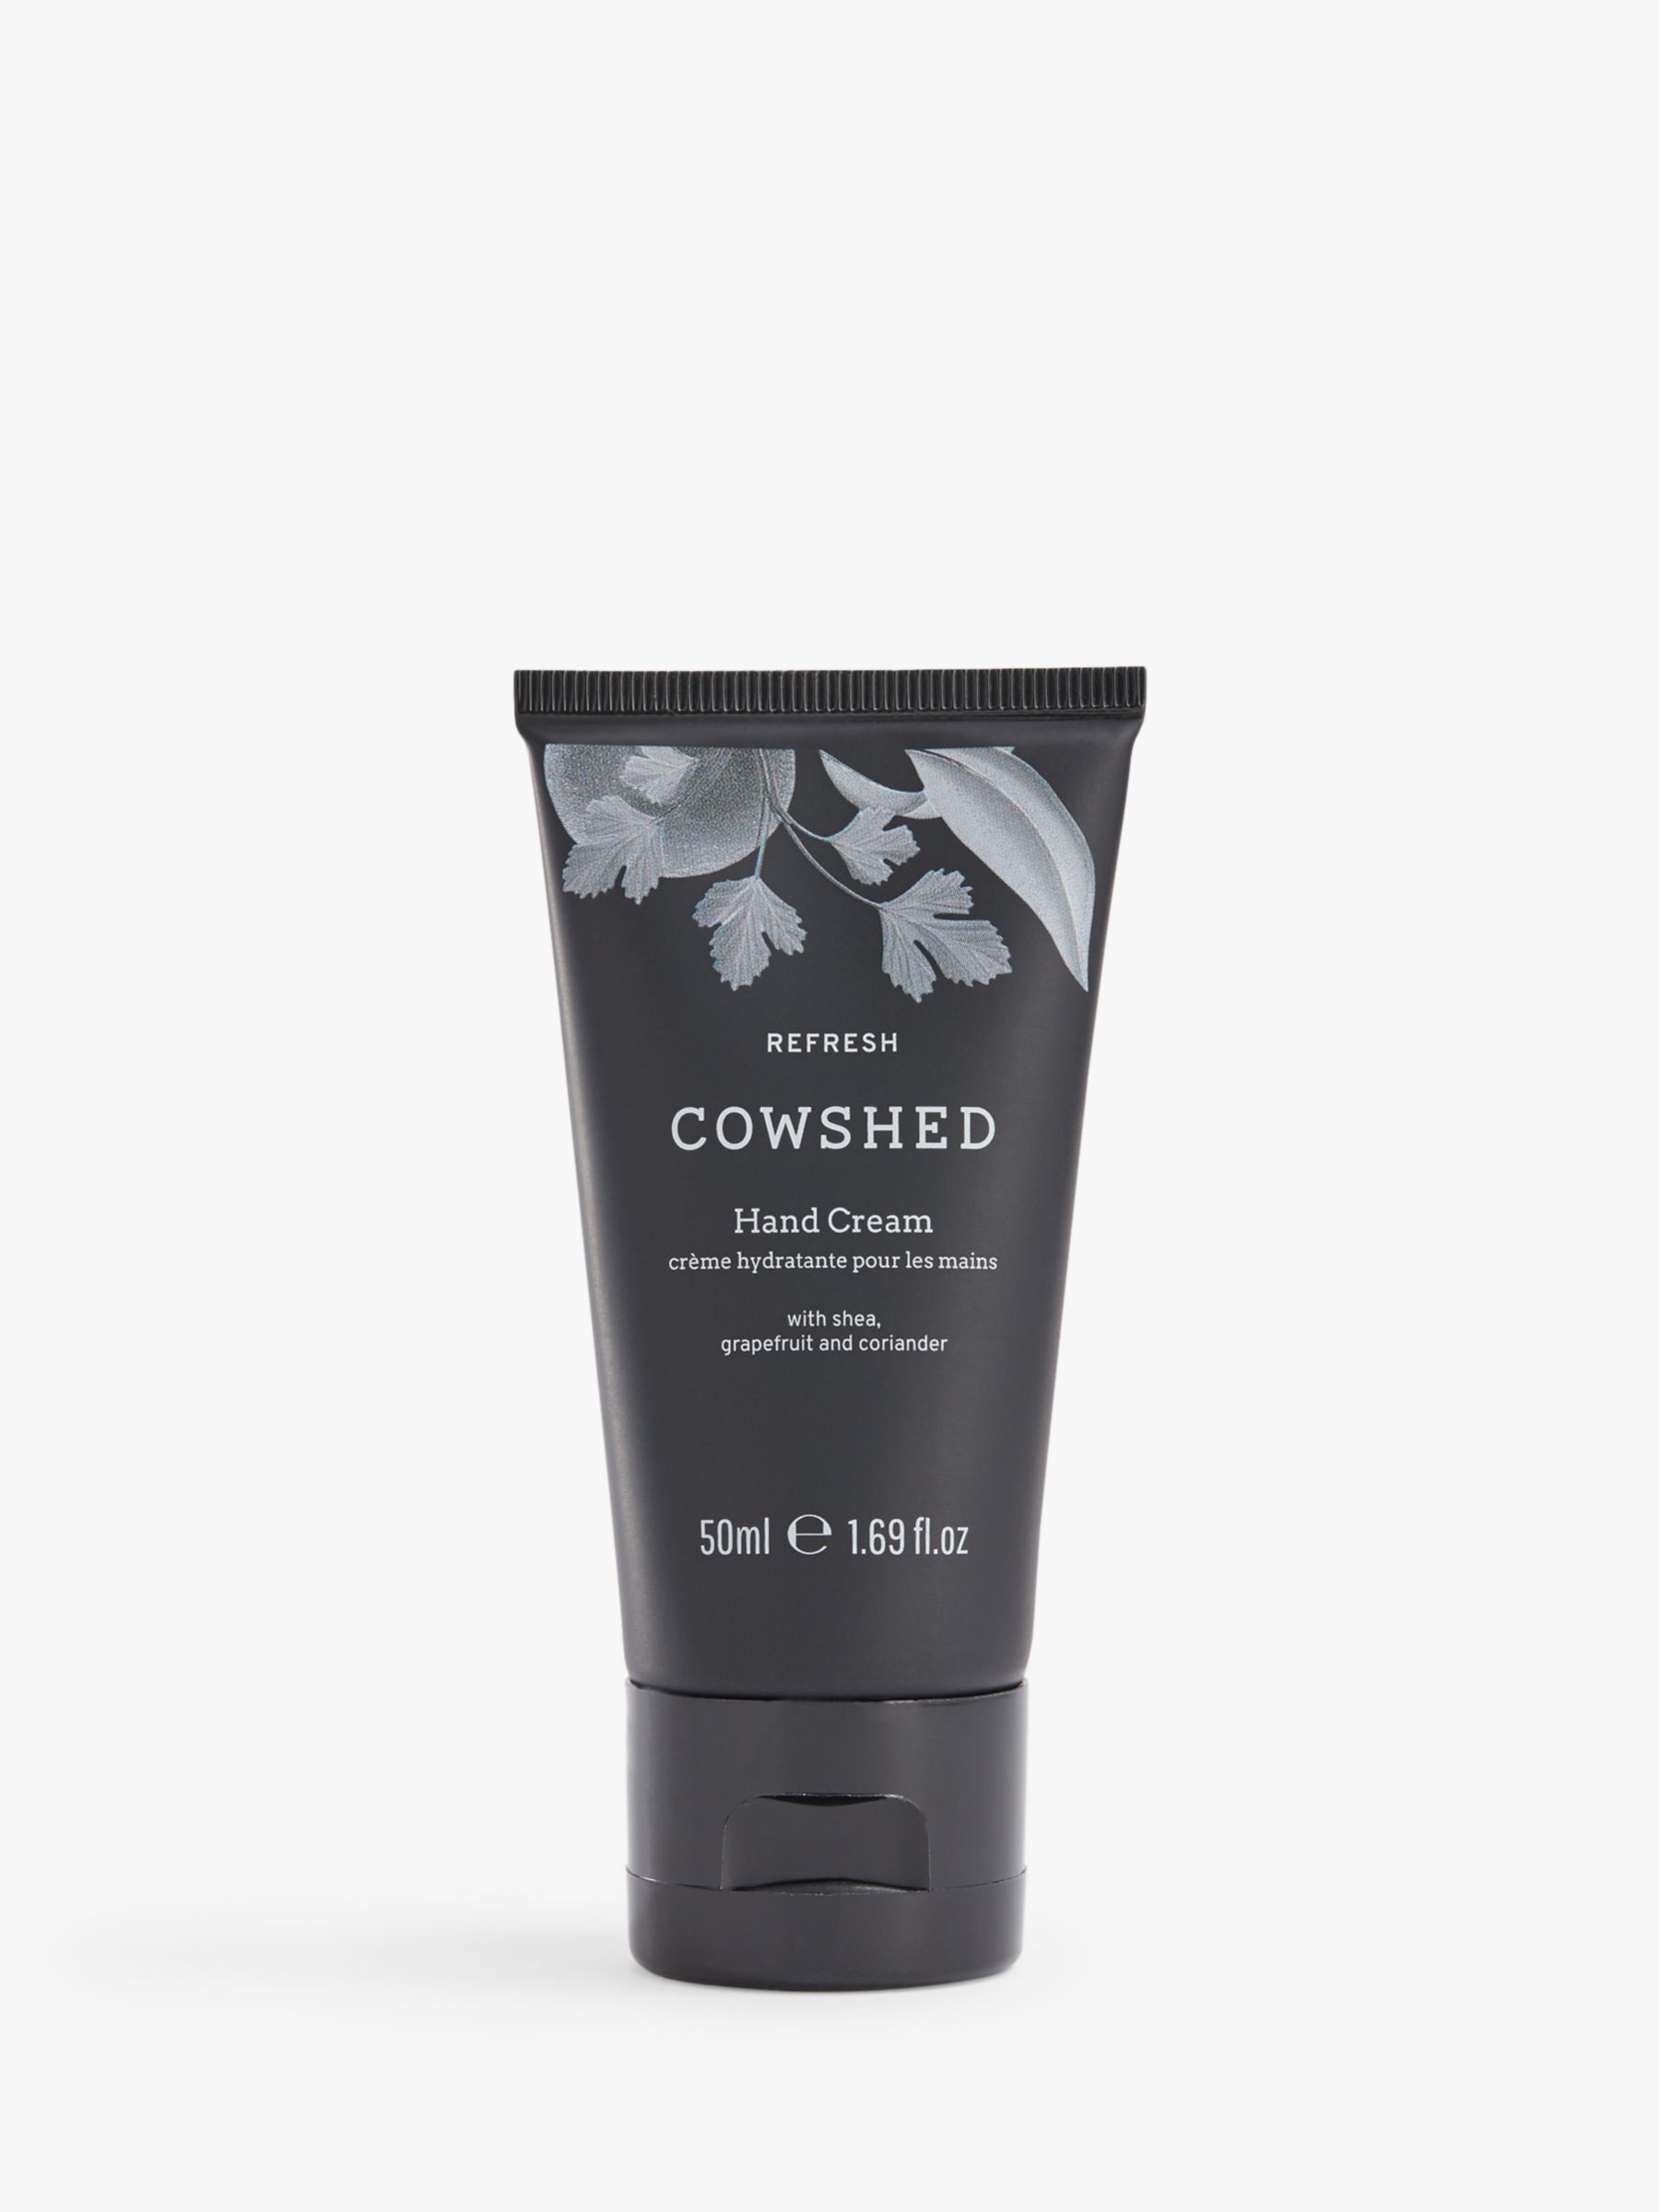 Cowshed Refresh Hand Cream, 50ml